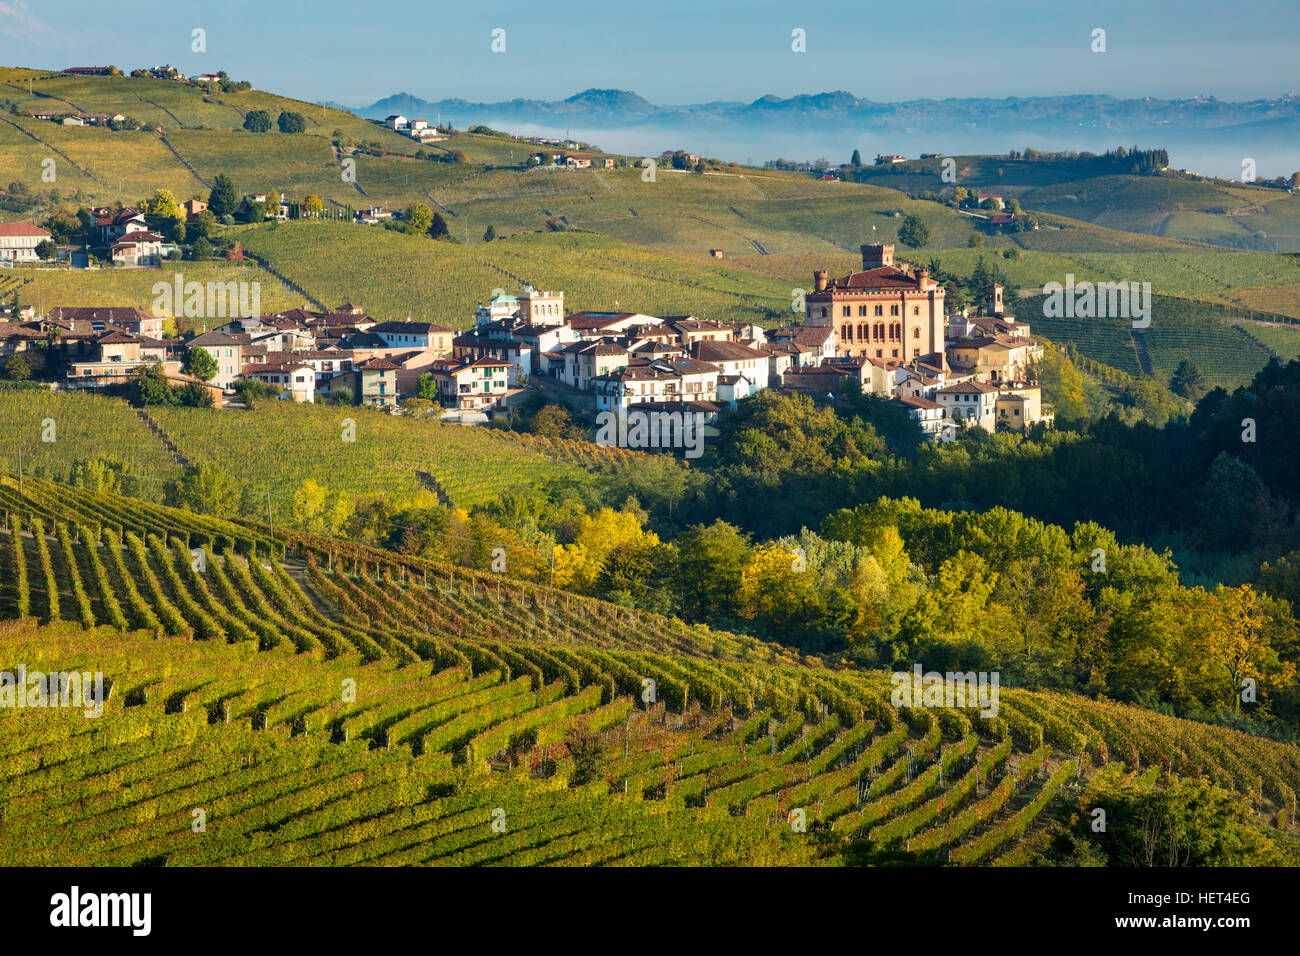 Dawn over vineyards and town of Barolo, Piemonte, Italy ...